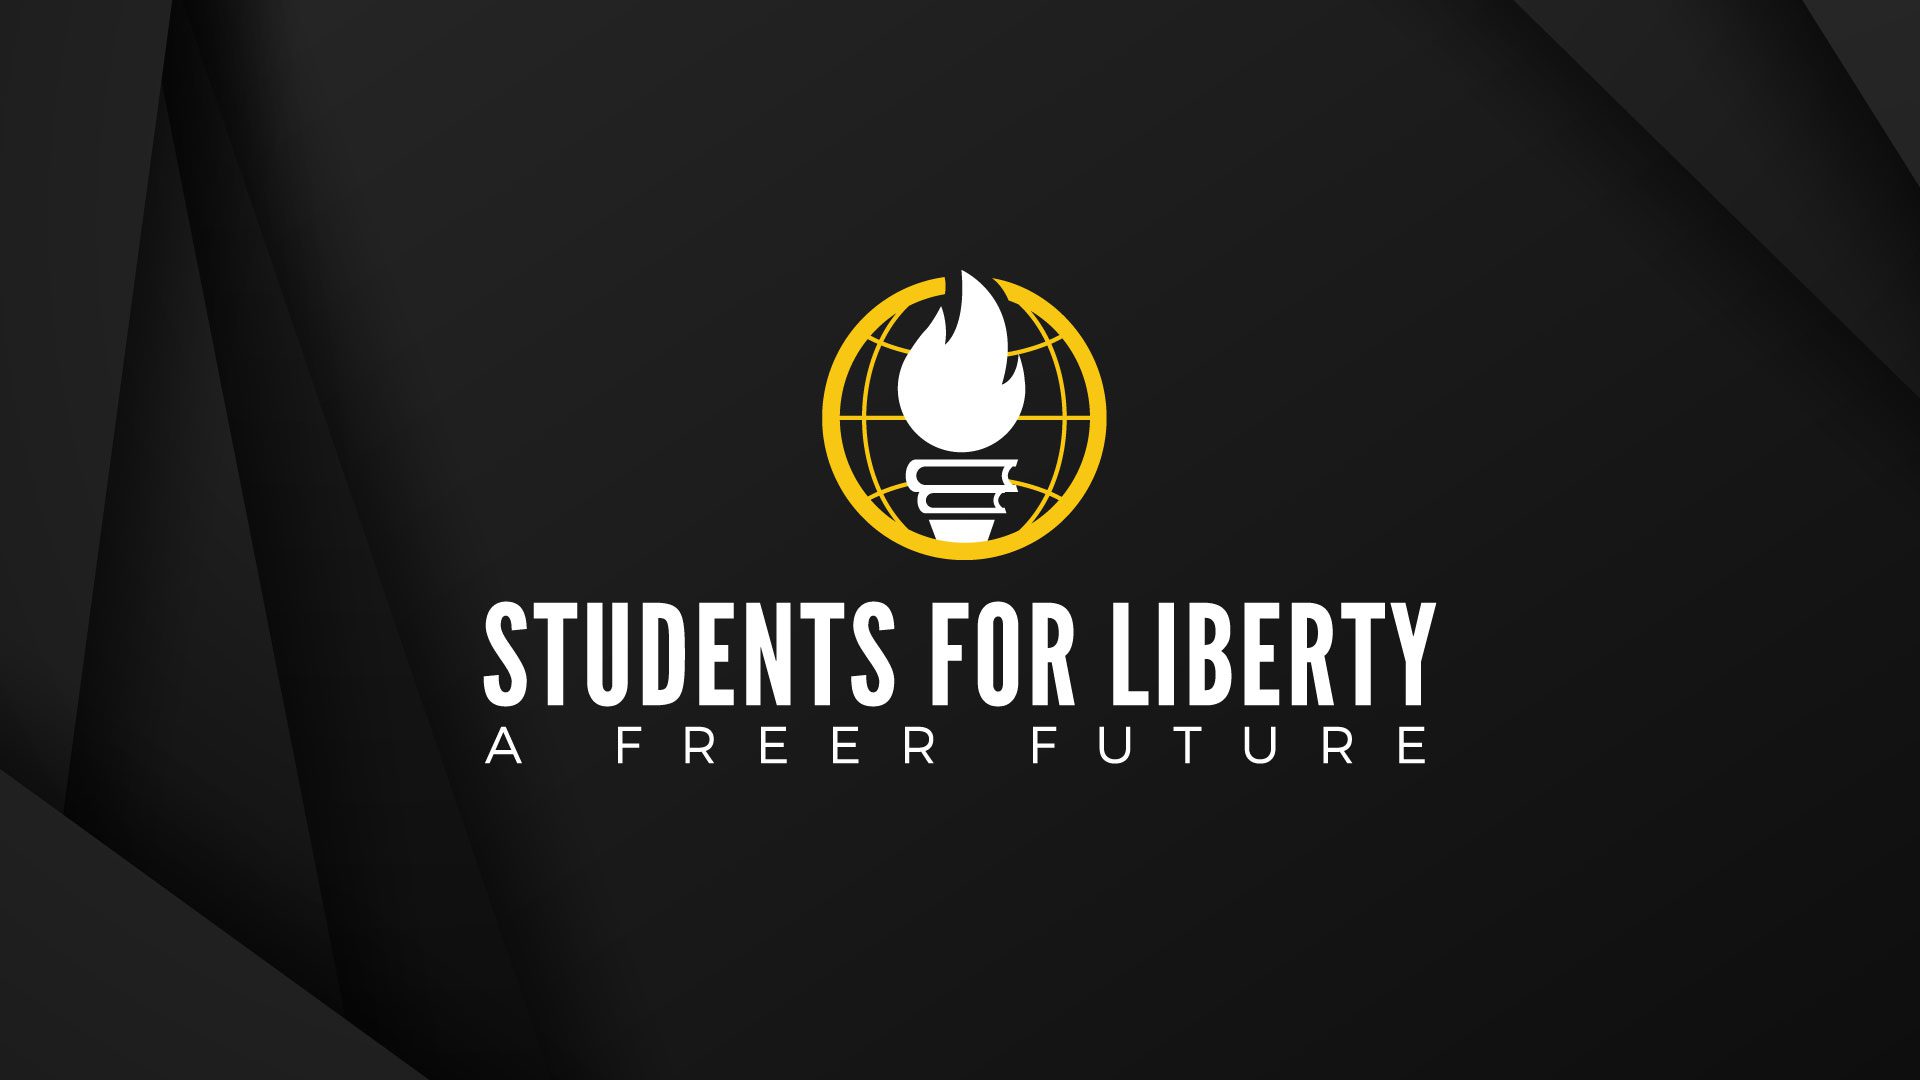 The Students For Liberty community deeply mourns the loss of a long-time supporter and a friend of liberty, Phil Harvey, who passed away last week